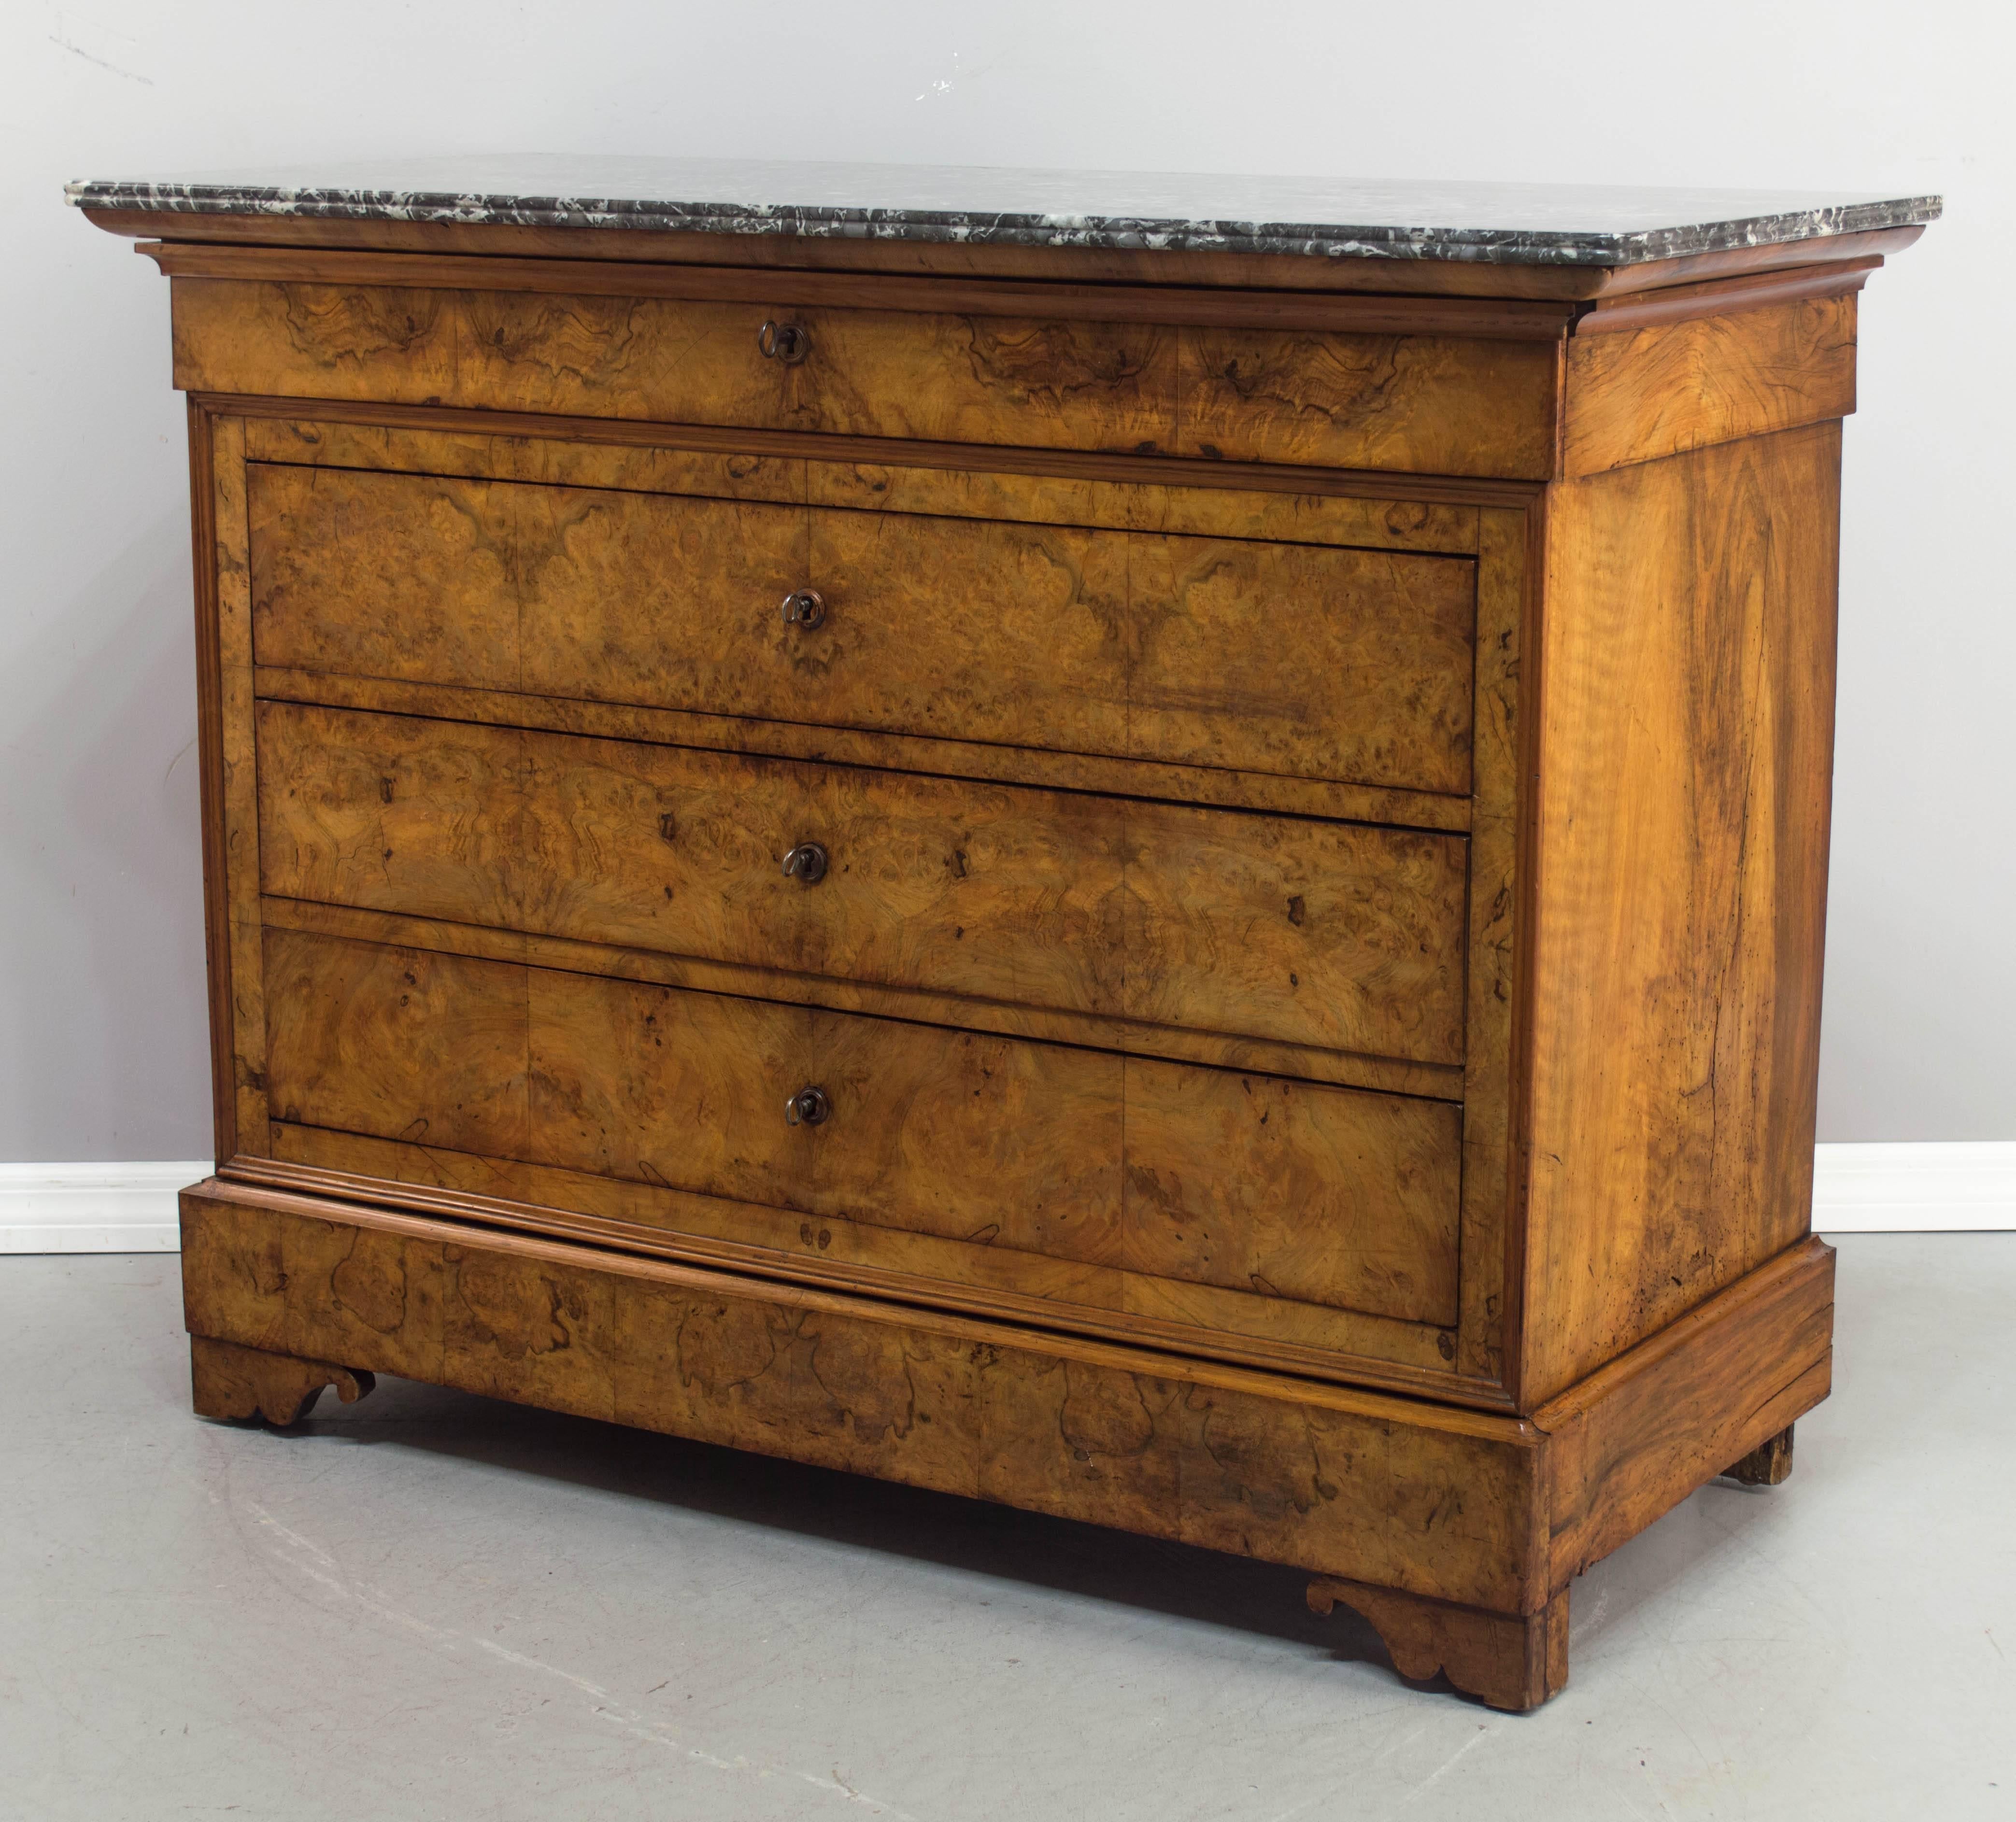 19th c. Louis Philippe commode, c.1820-1840 with five dovetailed drawers and original St. Anne grey marble top. Made of burl of walnut (front) and solid walnut (sides), with oak as a secondary wood. Drawers open easily and locks are in working